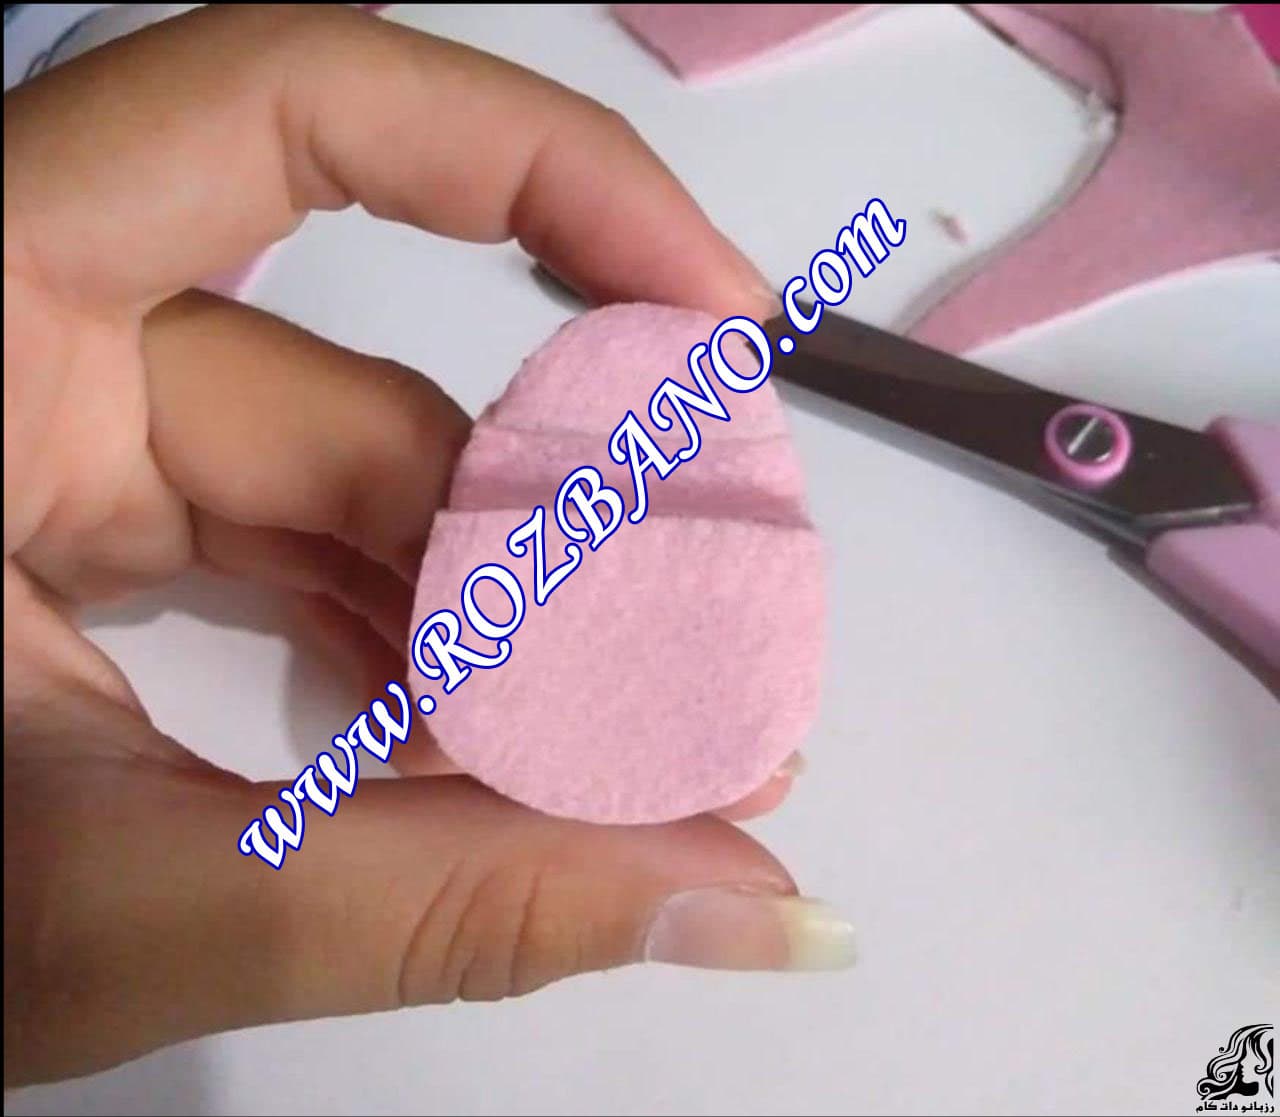 https://up.rozbano.com/view/2856686/Making%20sandals%20for%20dolls-08.jpg